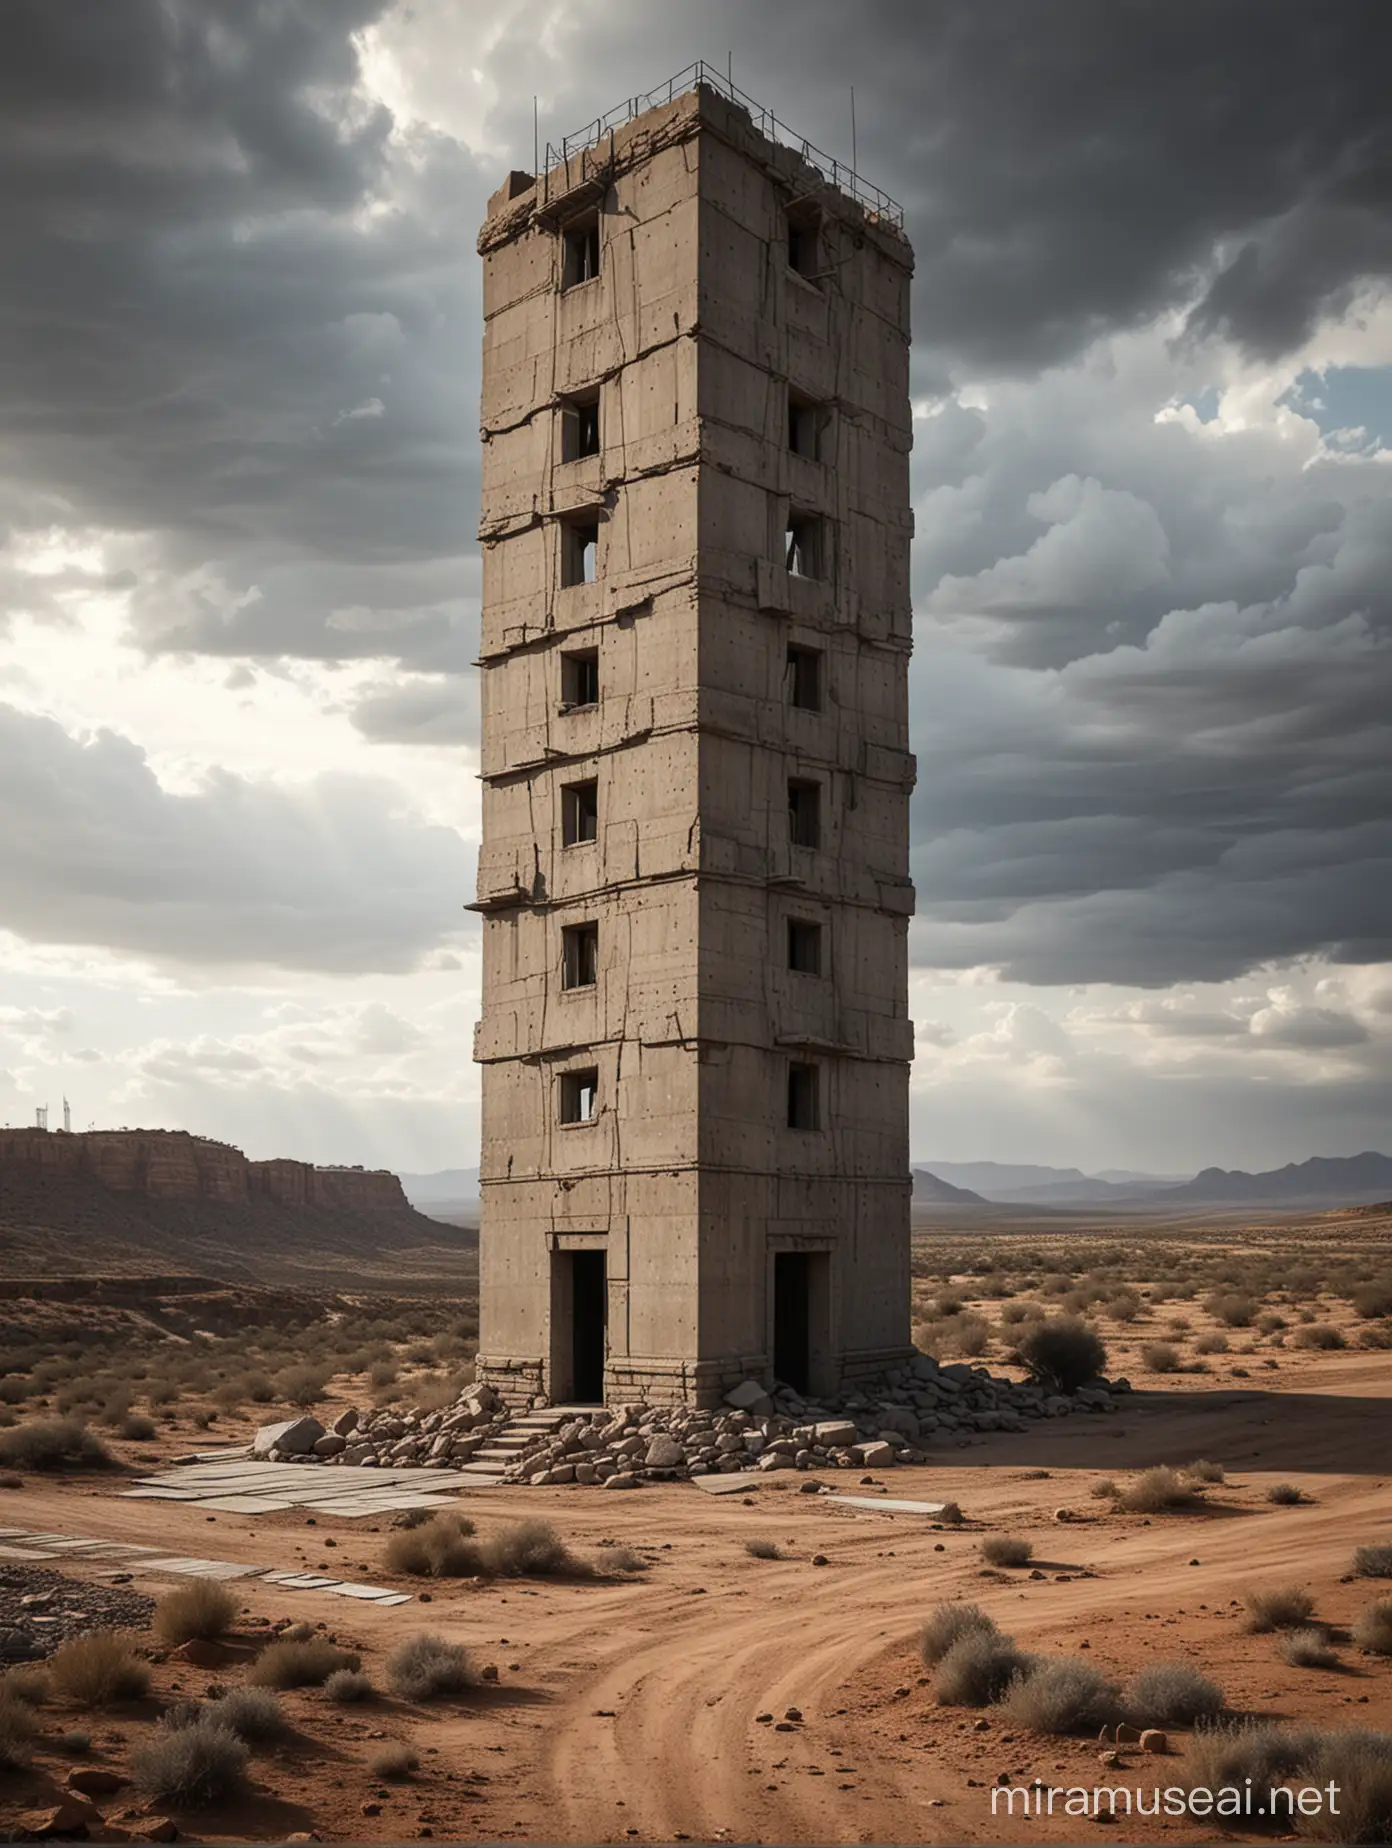 Abandoned Concrete Tower Rising from Barren Landscape